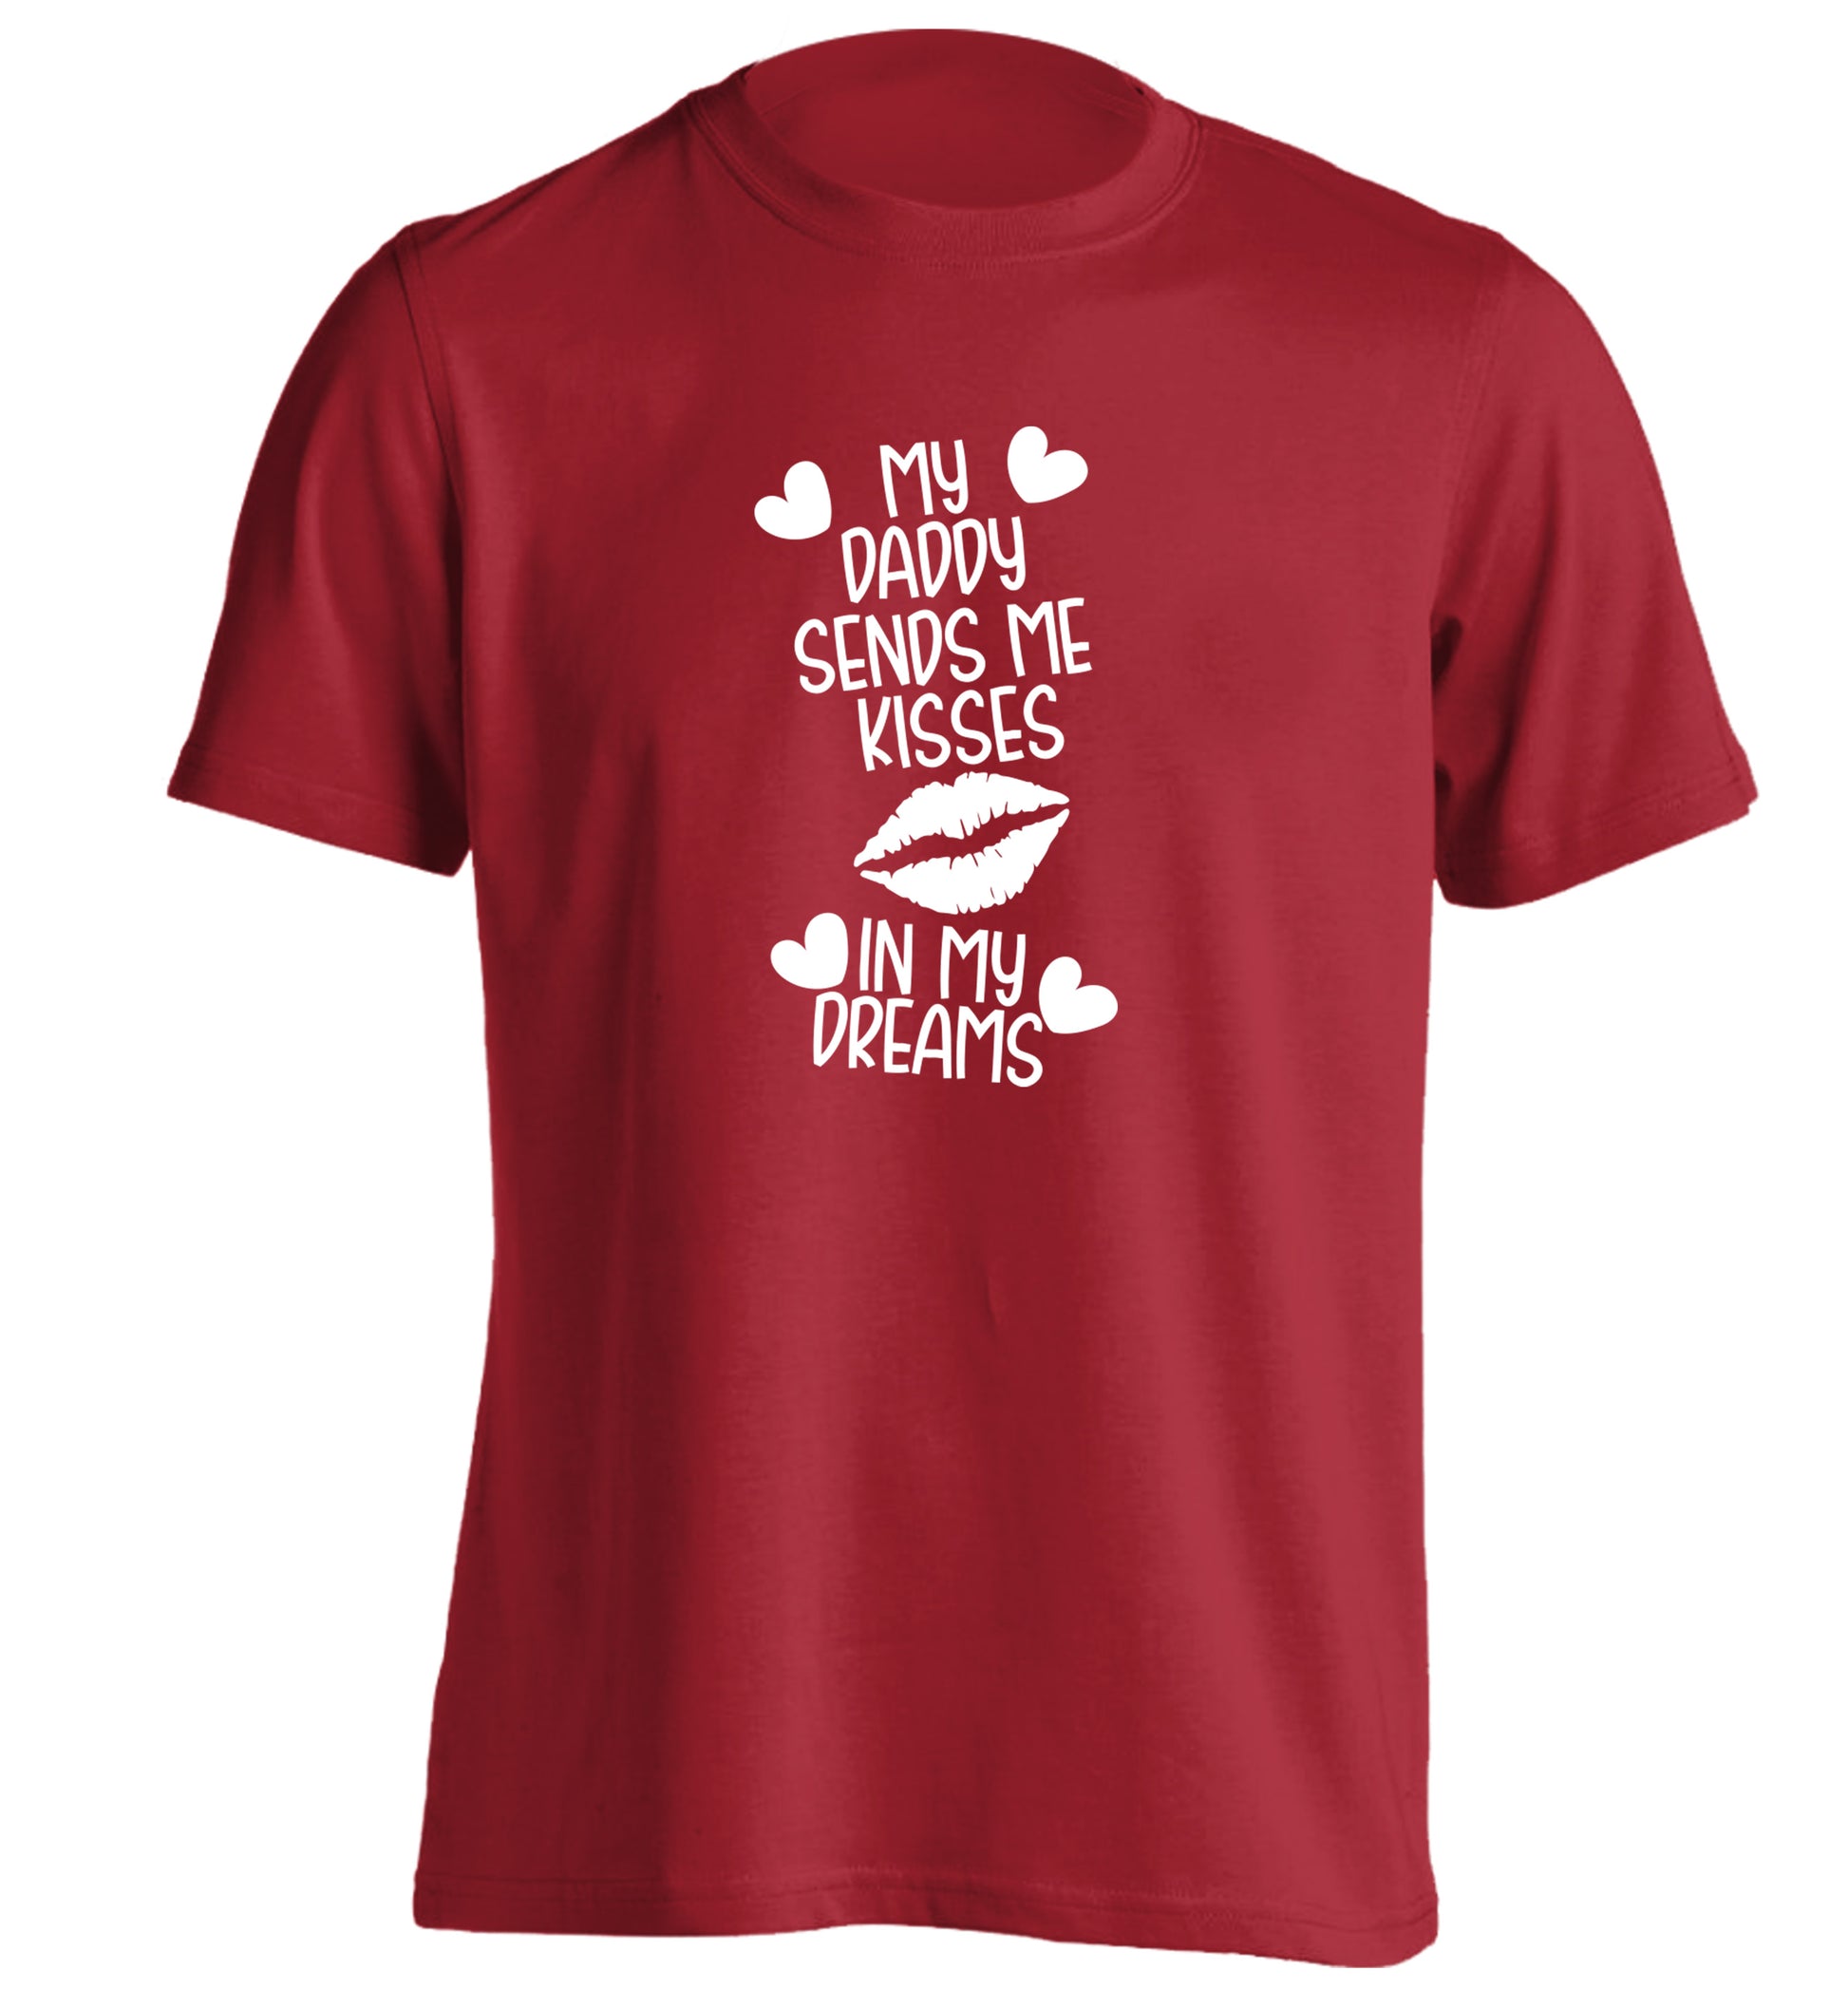 My daddy sends me kisses in my dreams adults unisex red Tshirt 2XL